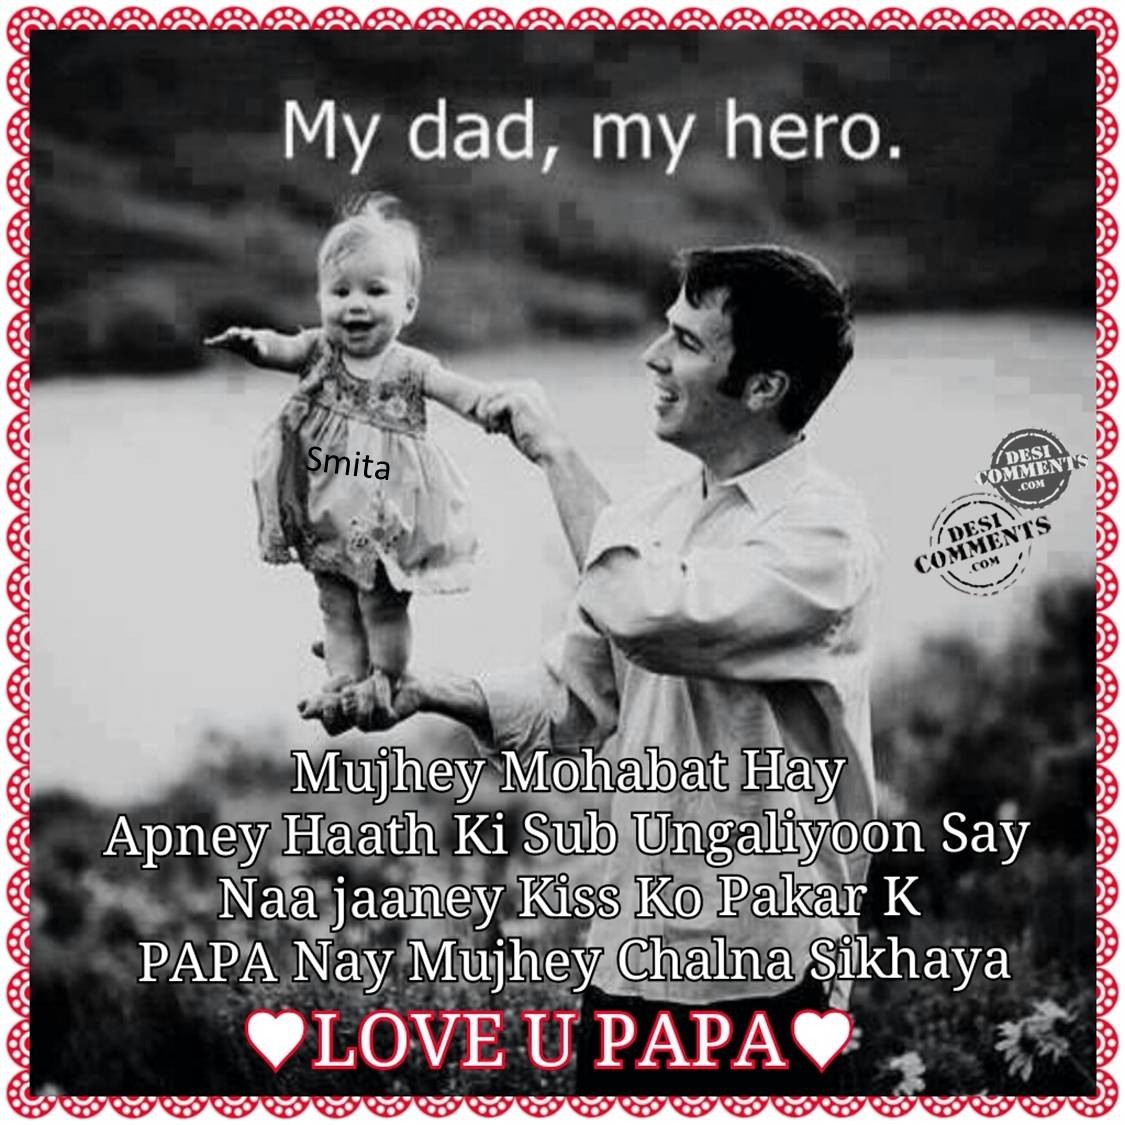 Lovely I Love U Papa Quotes In Hindi. Love quotes collection within HD image